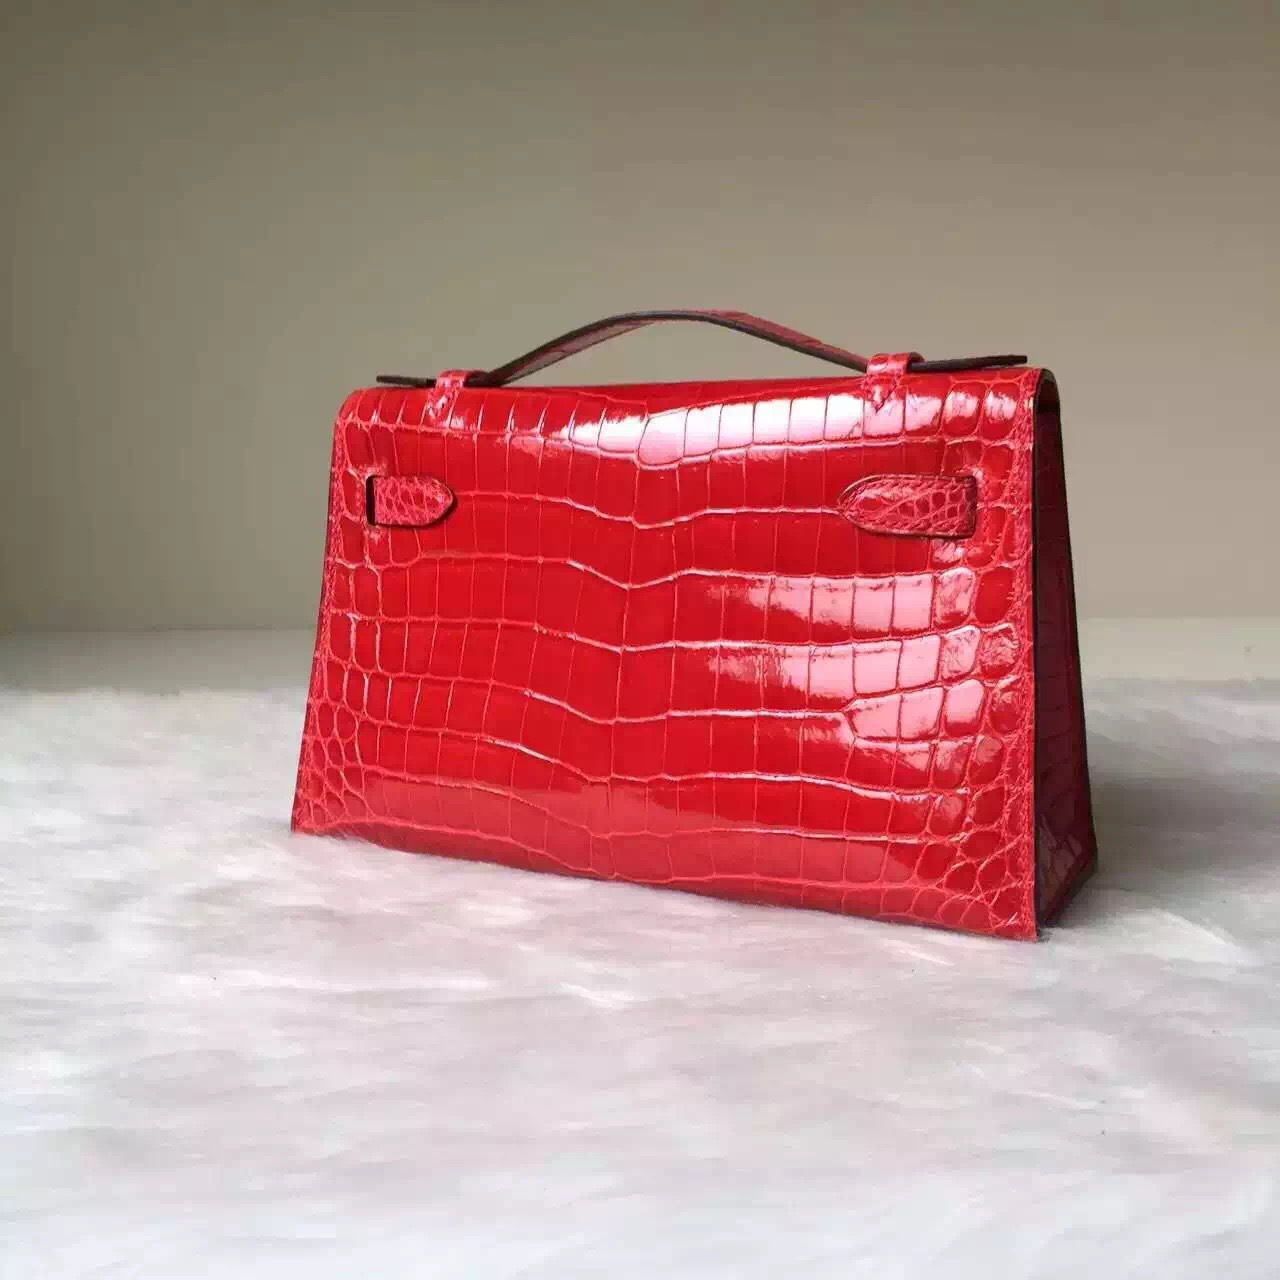 Discount Hermes CK95 Braise Red Crocodile Leather MiniKelly Pochette Bag 22cm